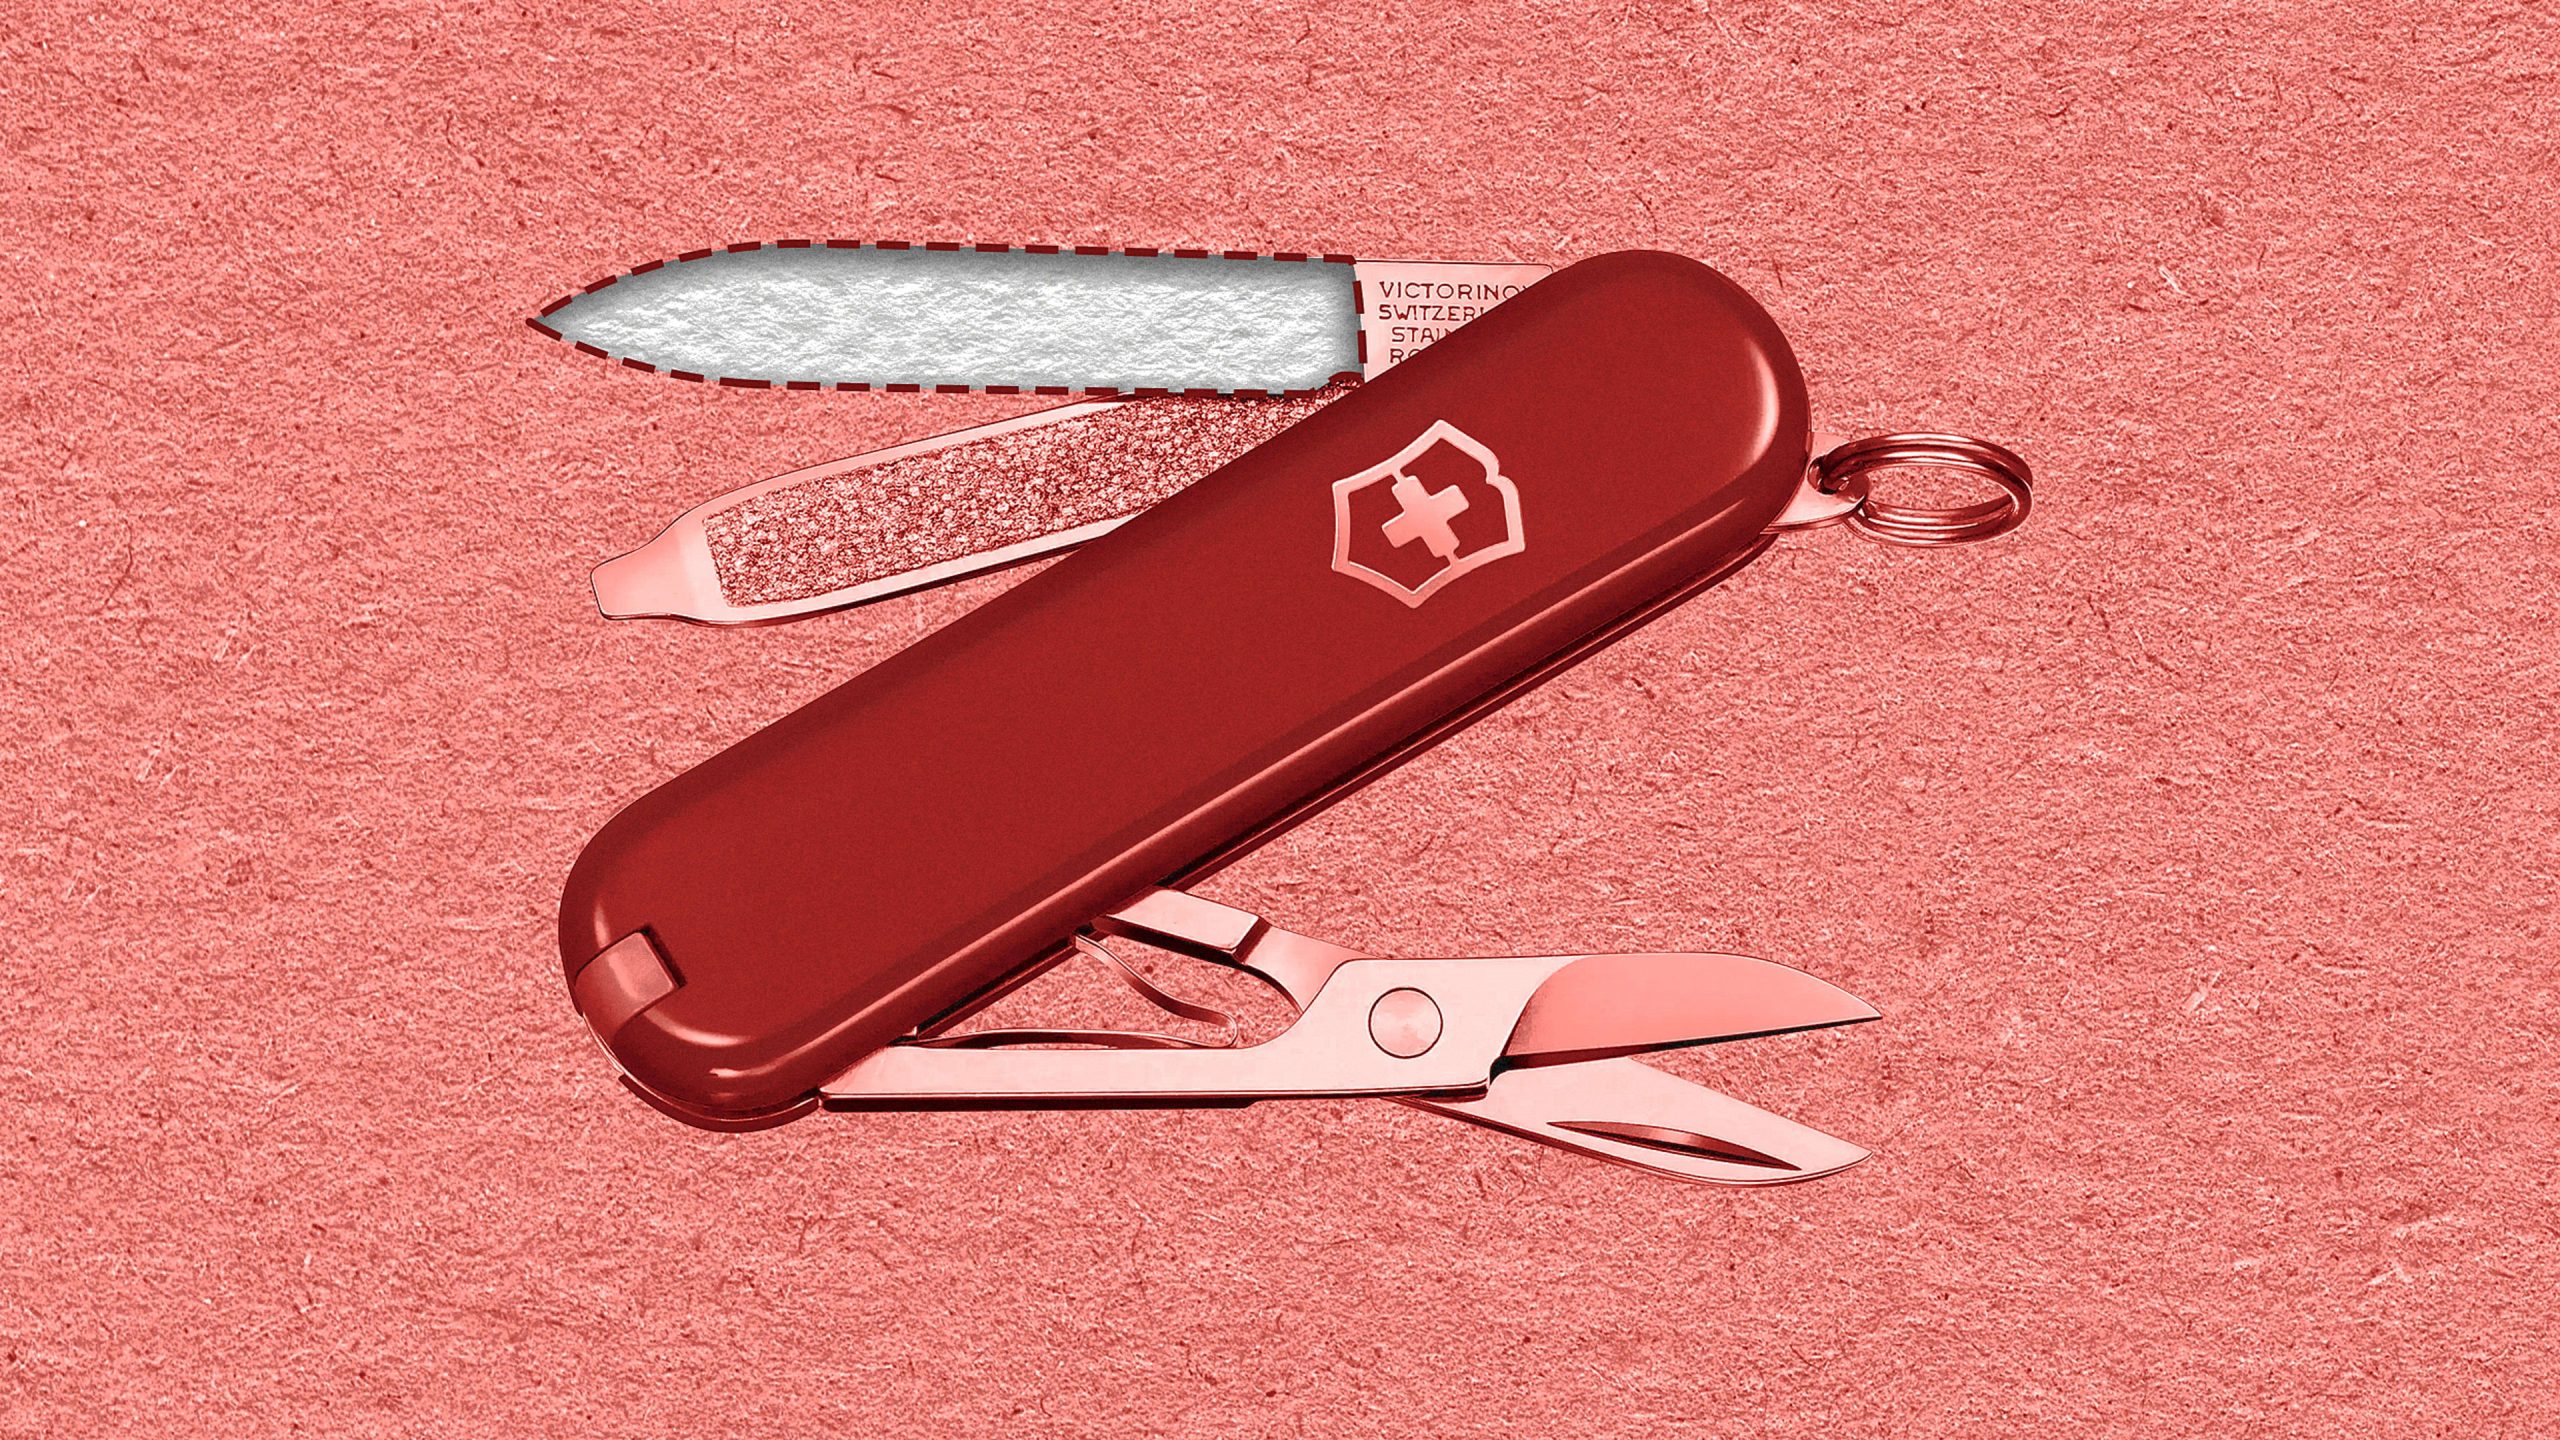 The next Swiss Army Knife will be knife-less